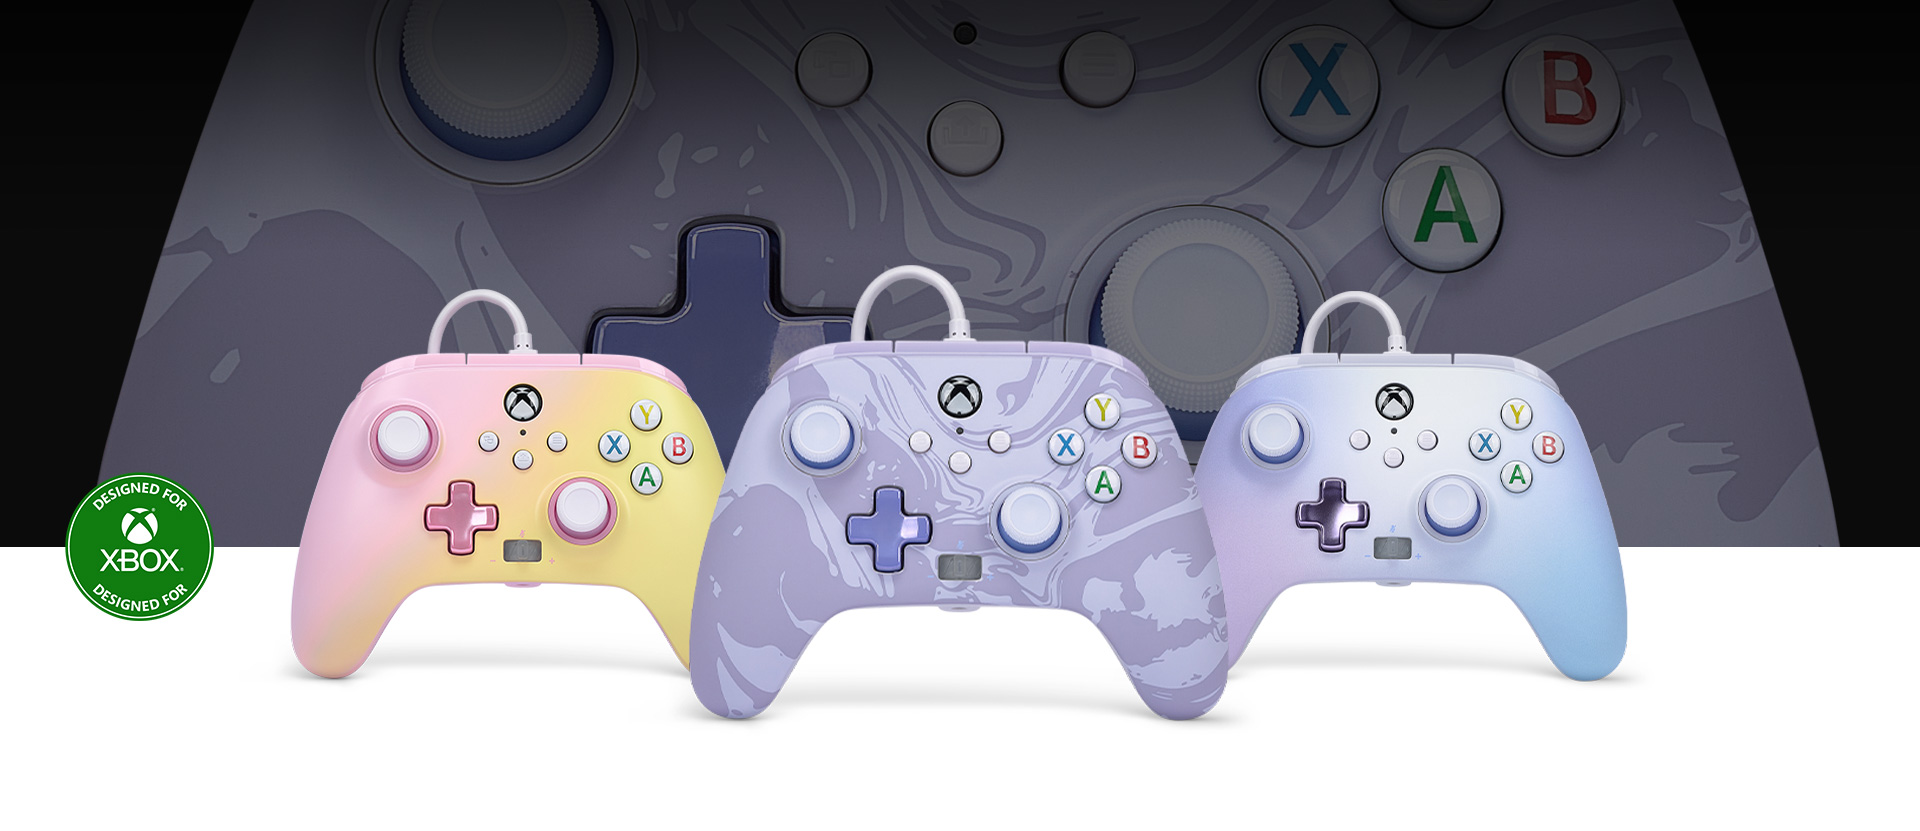 Designed for Xbox logo, Purple Swirl controller in front with the Pink Lemonade and Pastel Dream controllers beside it